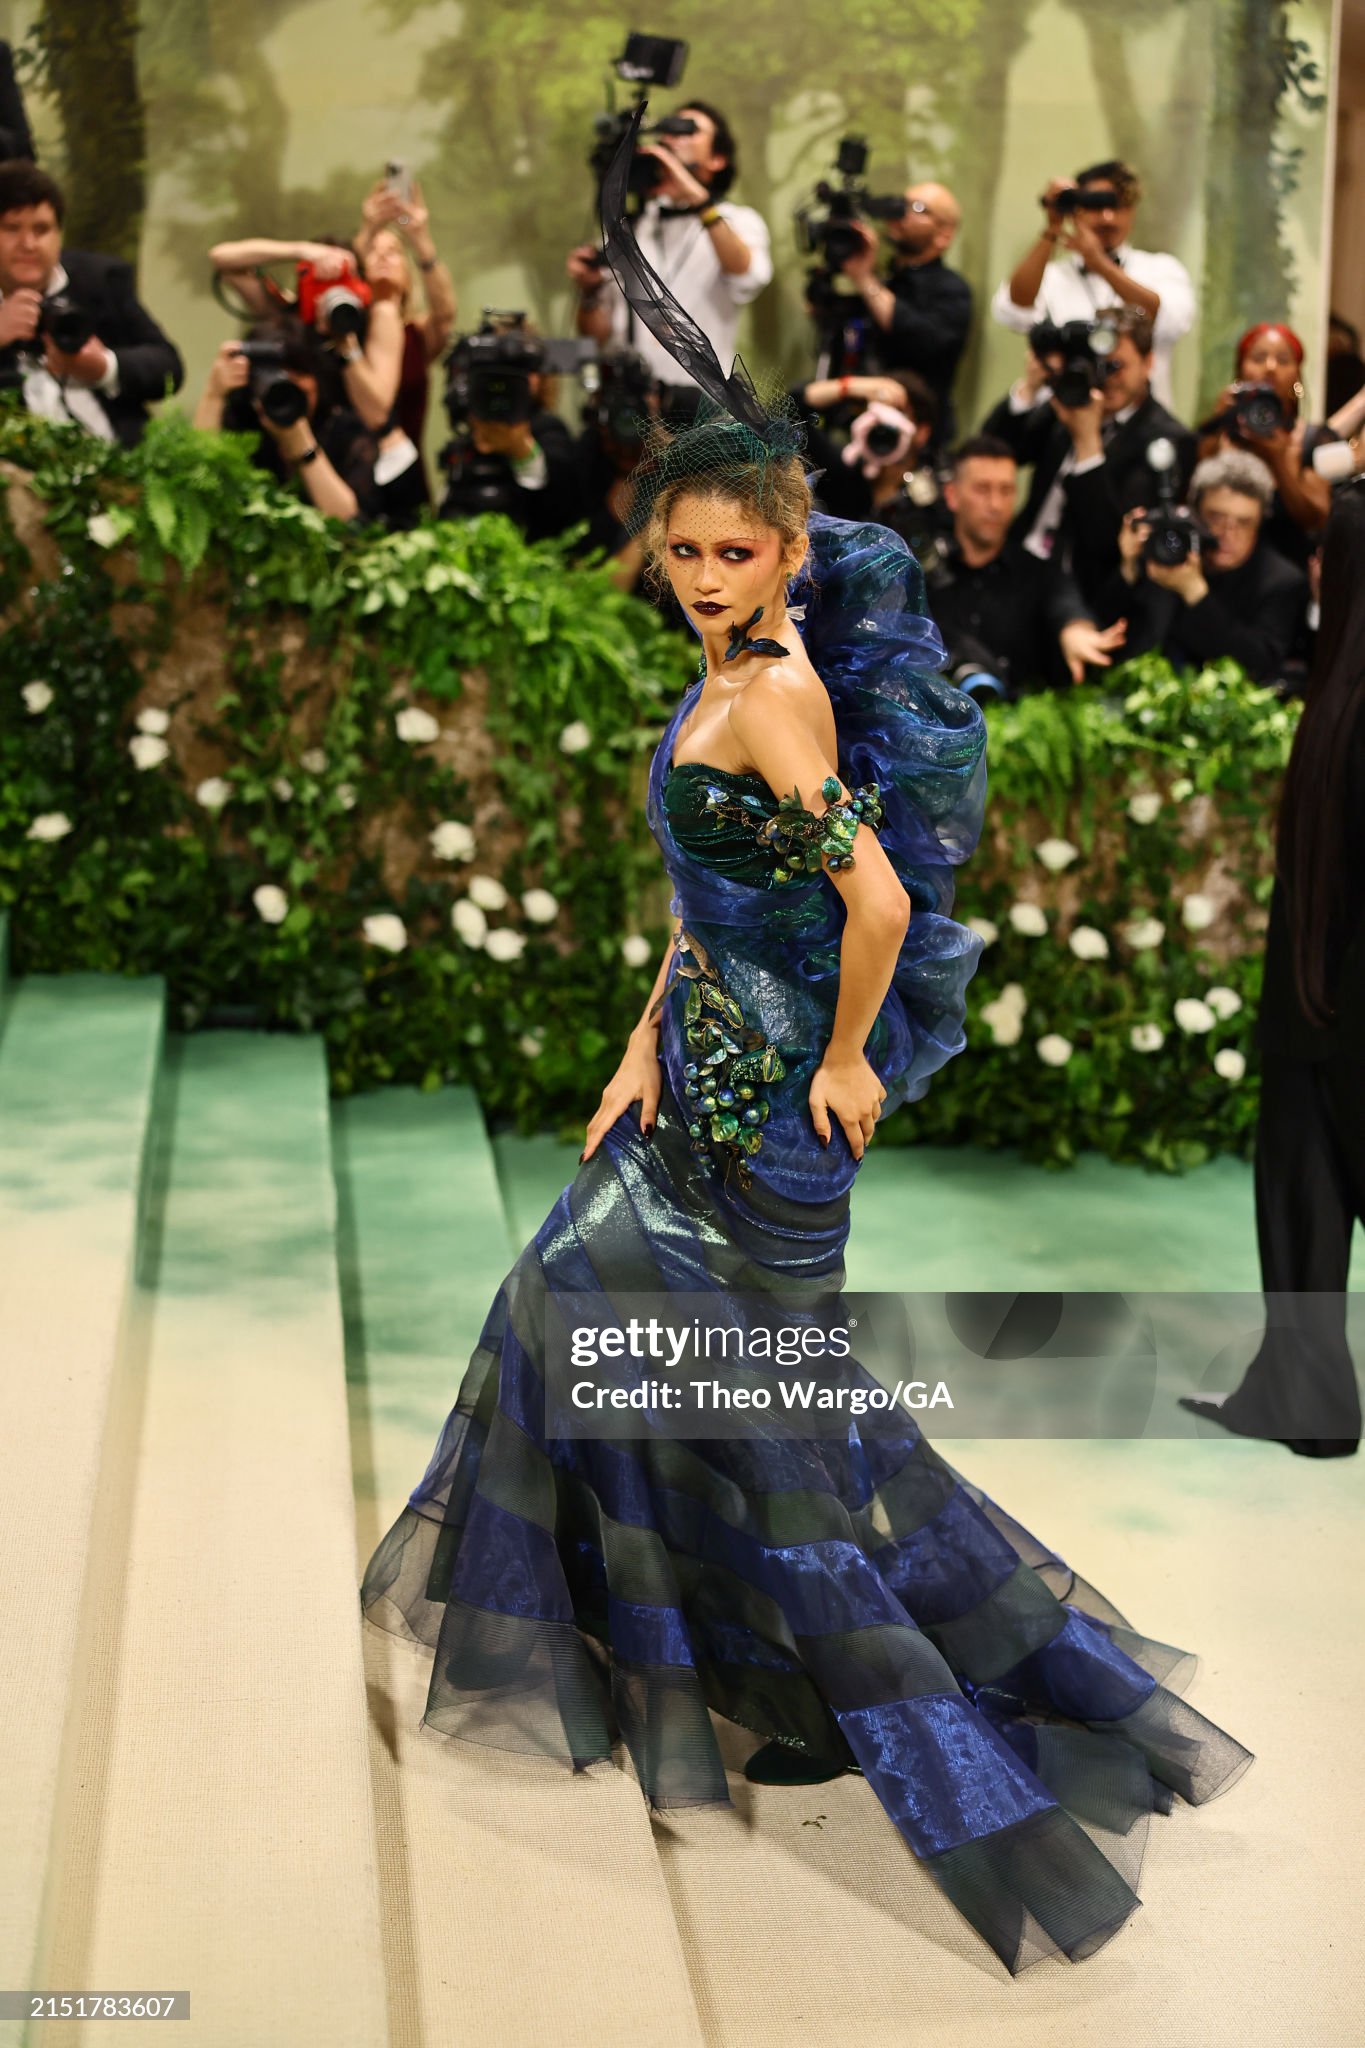 gettyimages-2151783607-2048x2048.jpg